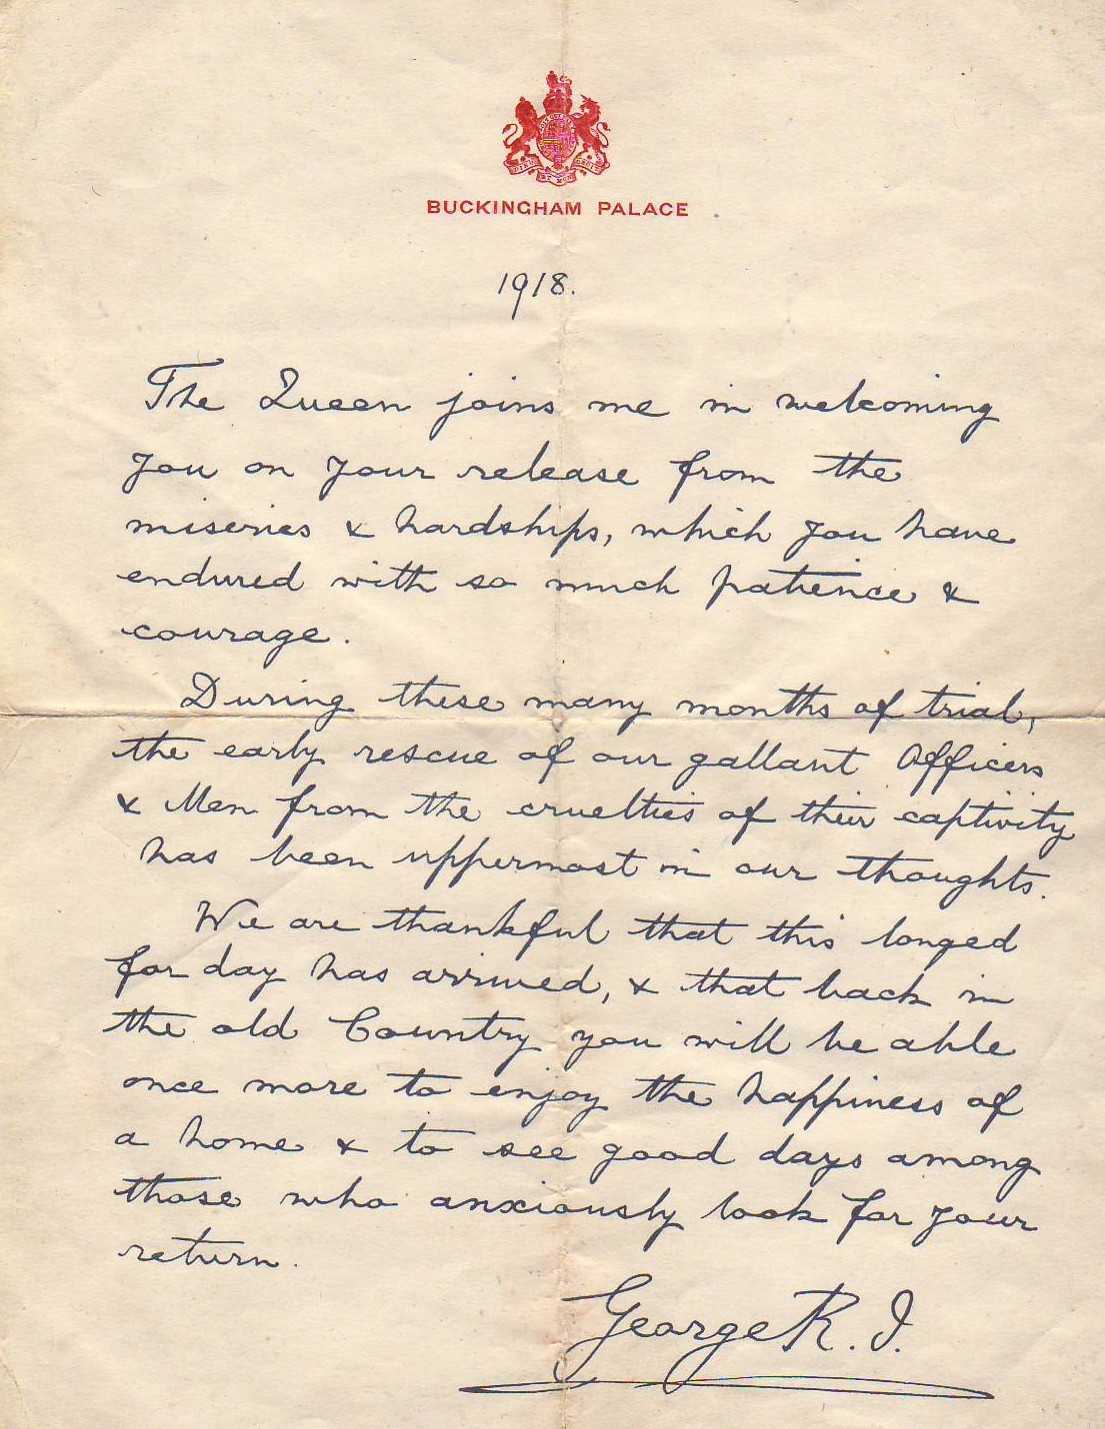 King George V's hand-written message to the prisoners of war in Germany